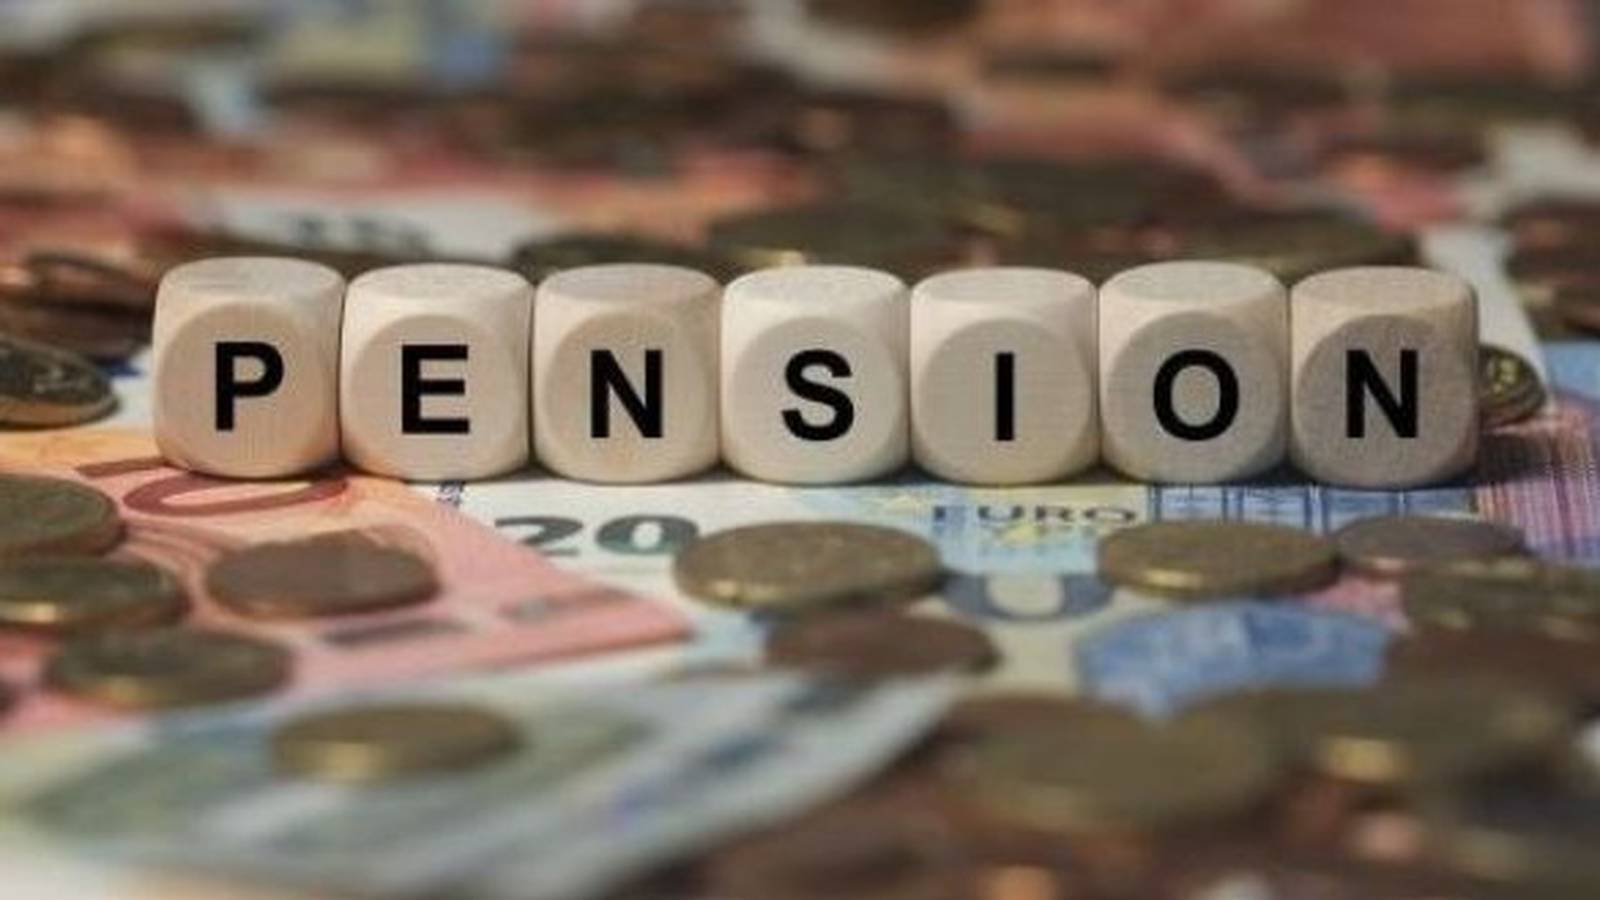 help-i-ve-no-prsi-stamps-can-i-still-get-a-pension-the-irish-times